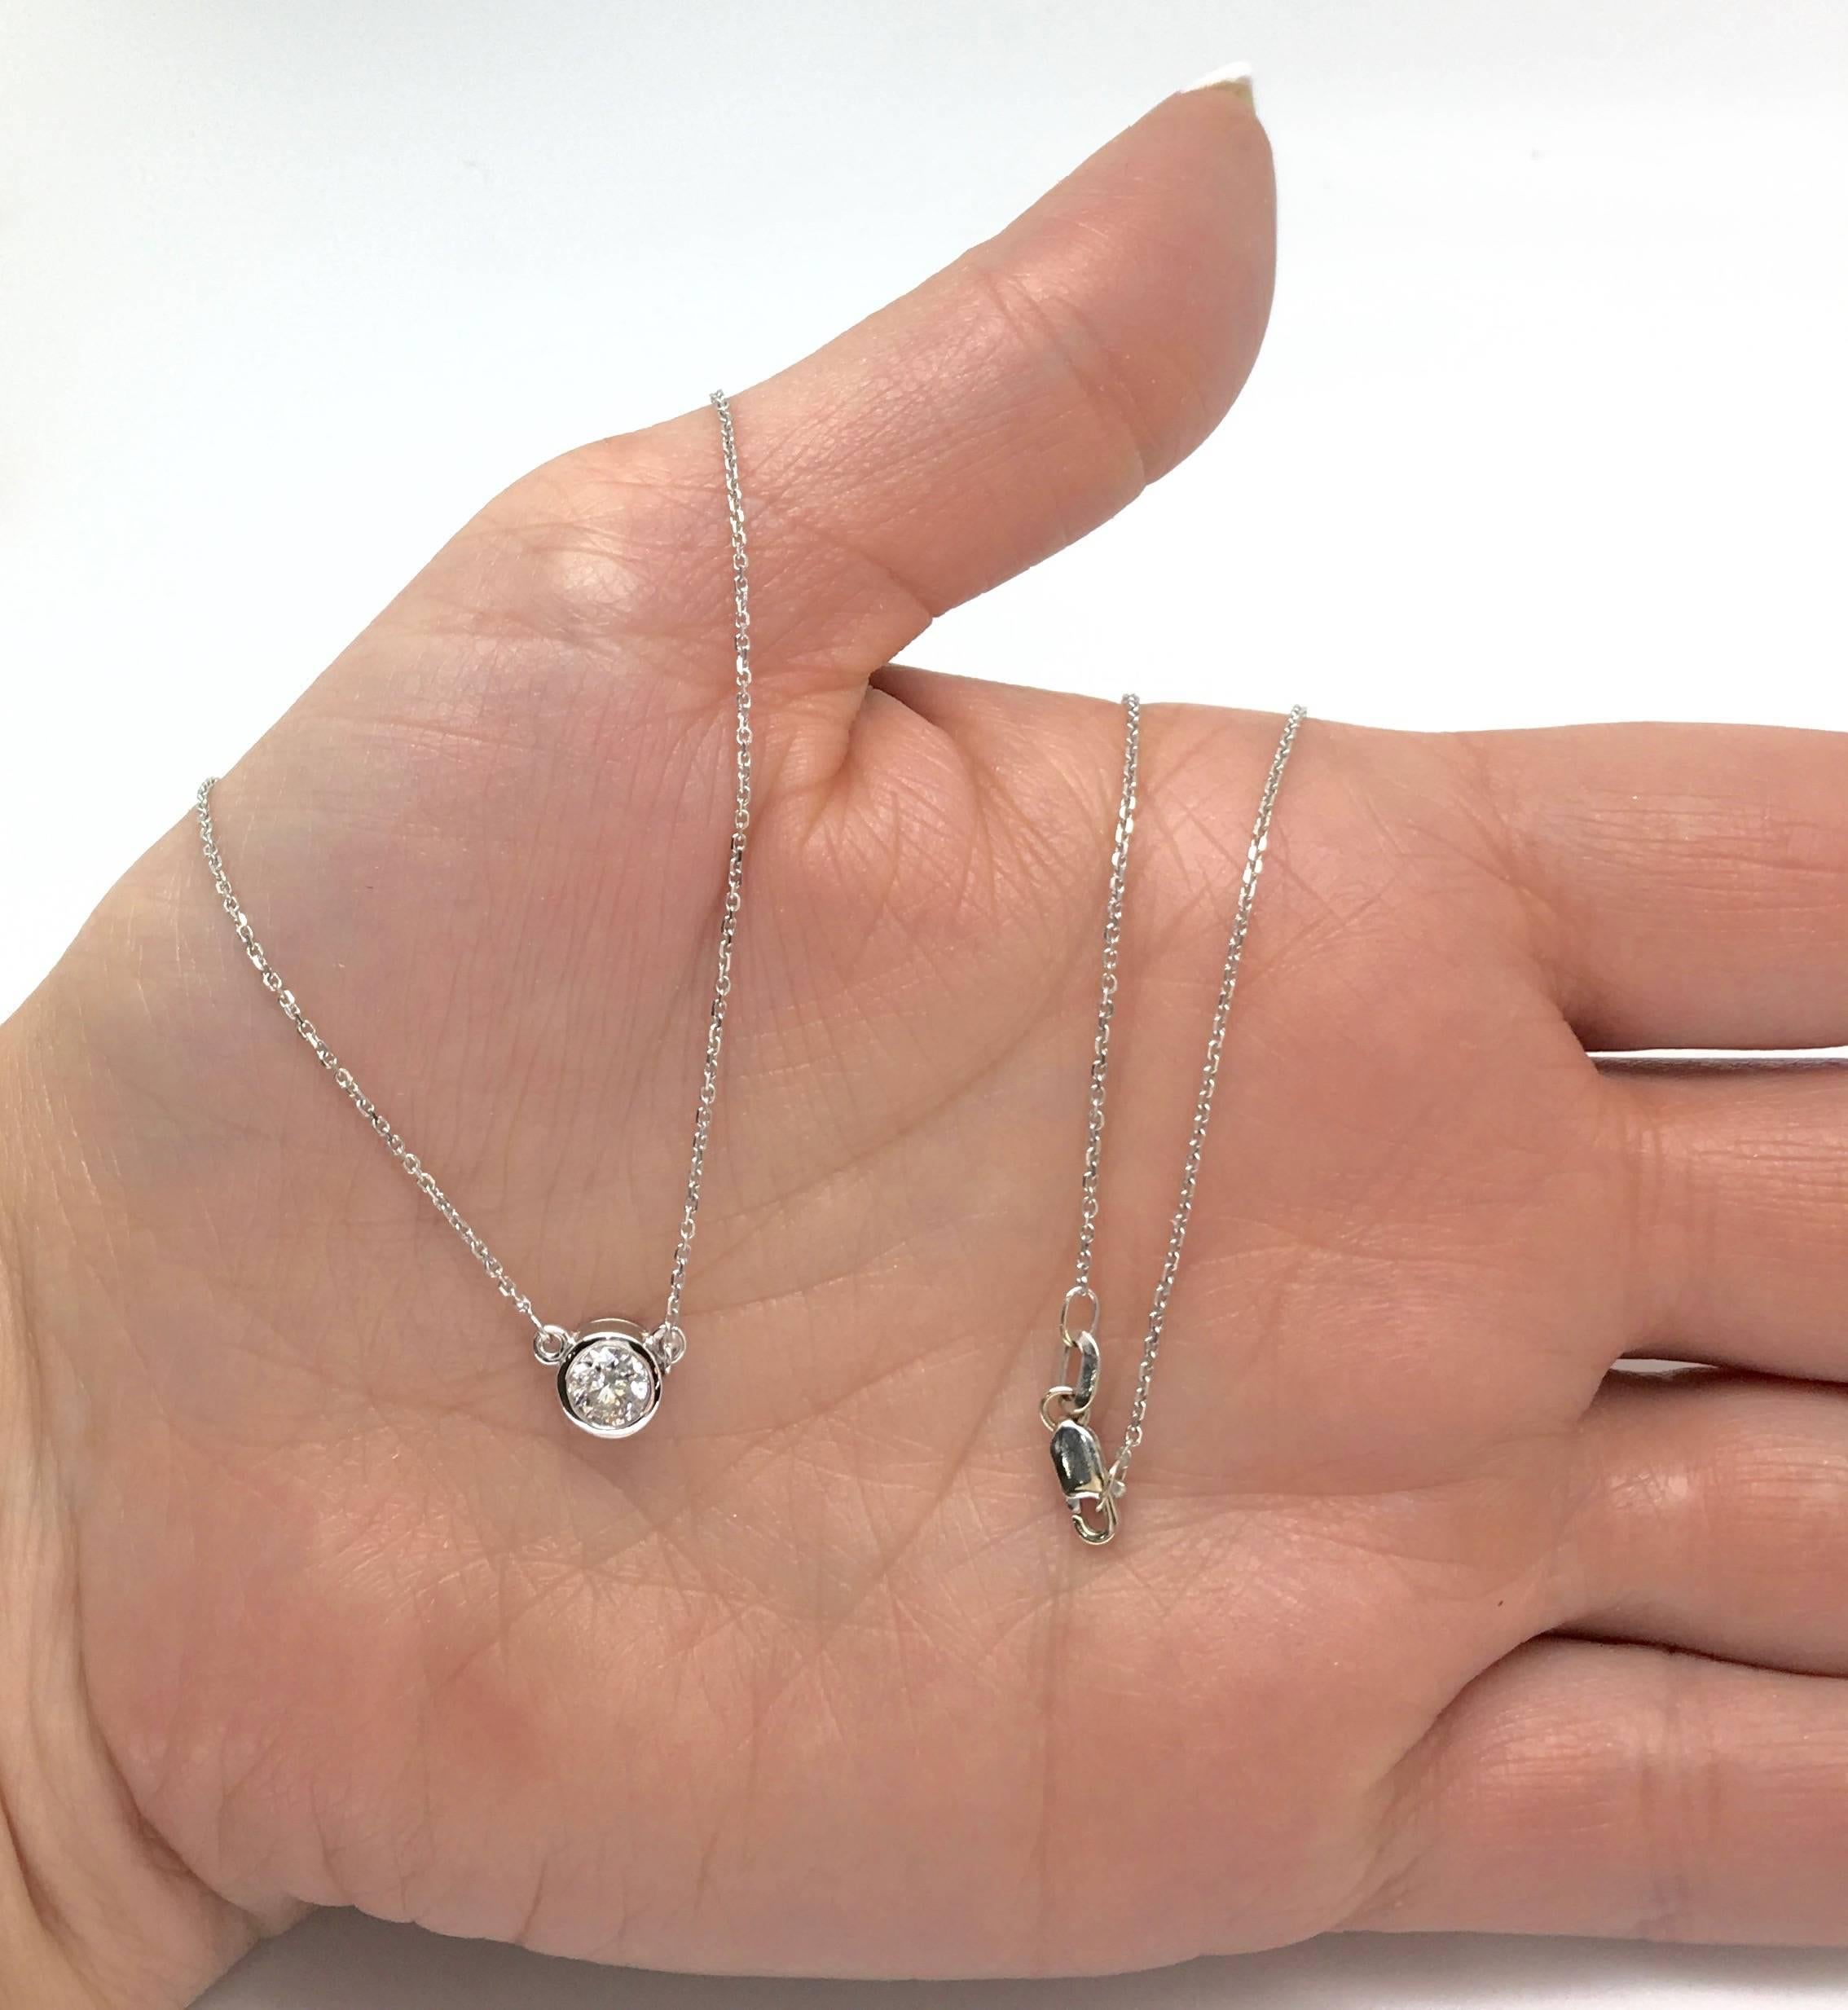 This 14K white gold necklace features an approximately .50CT Bezel Set Round Brilliant Cut Diamond. The diamond displays G-H color and I1 clarity. The necklace is 19” in length and weighs 2.6 grams.